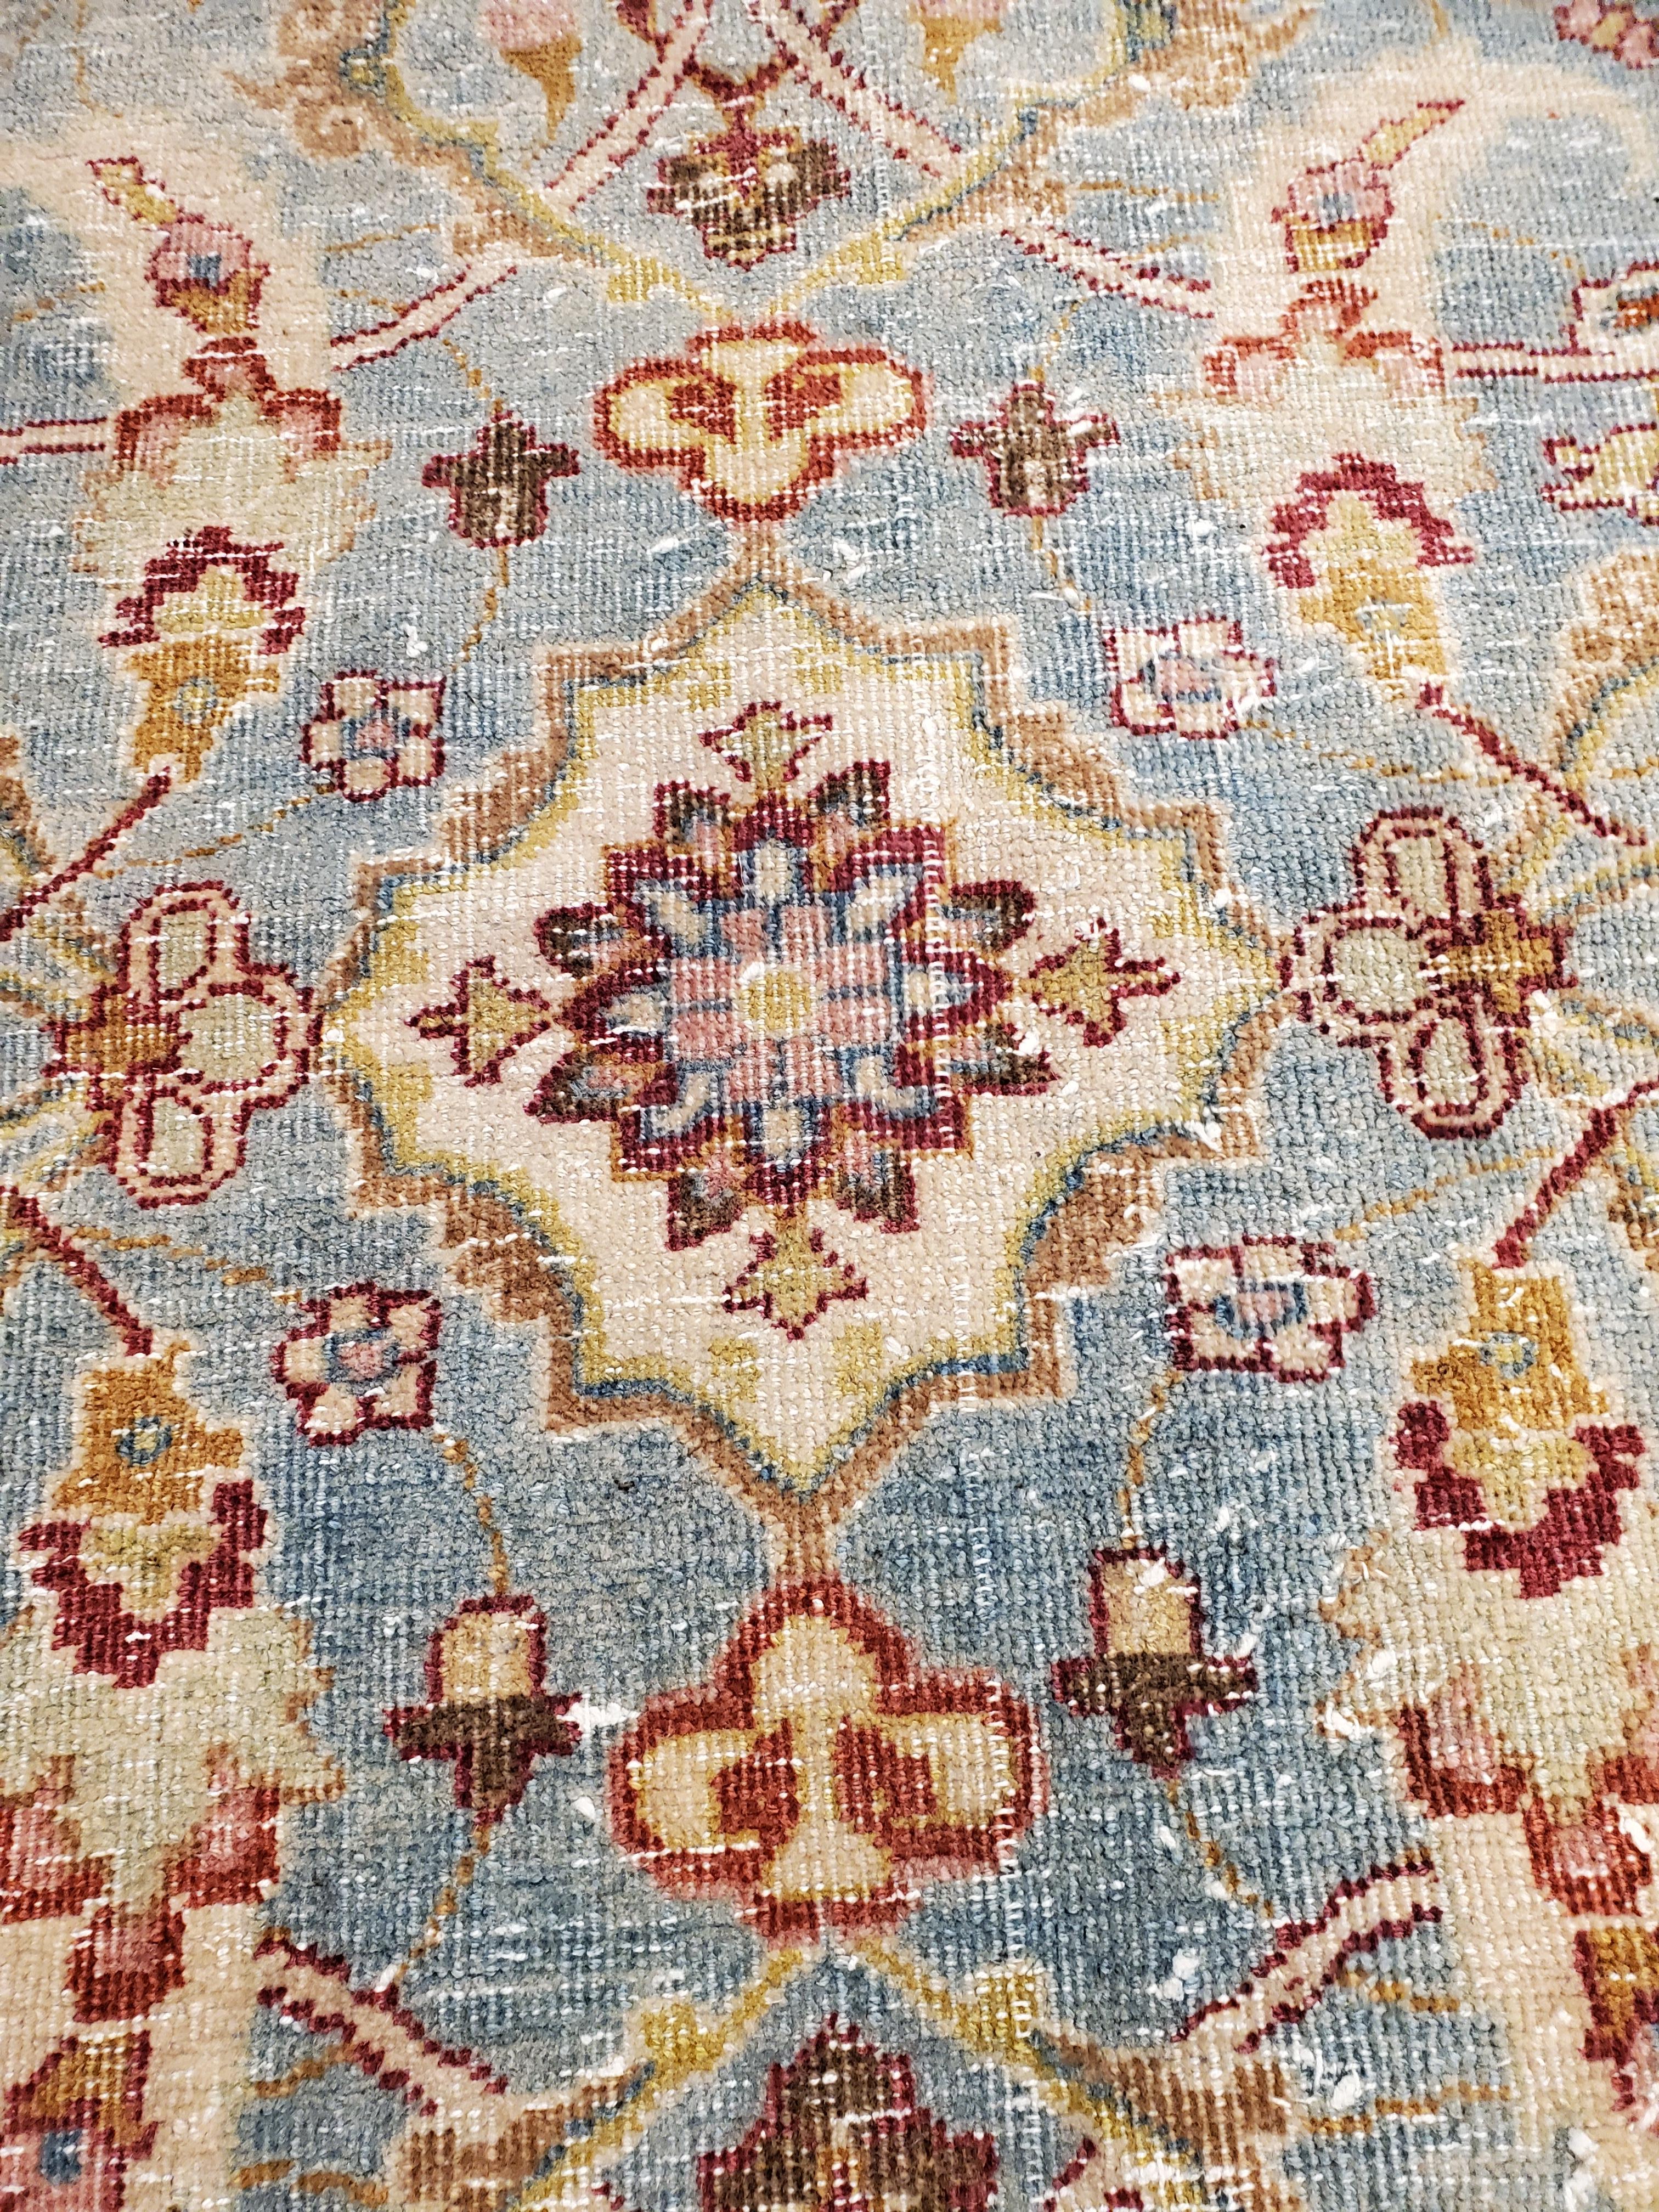 Antique Tabriz Rug, Handmade Oriental Rug in Terracotta, Light Blue, Gold, Green In Fair Condition For Sale In Port Washington, NY